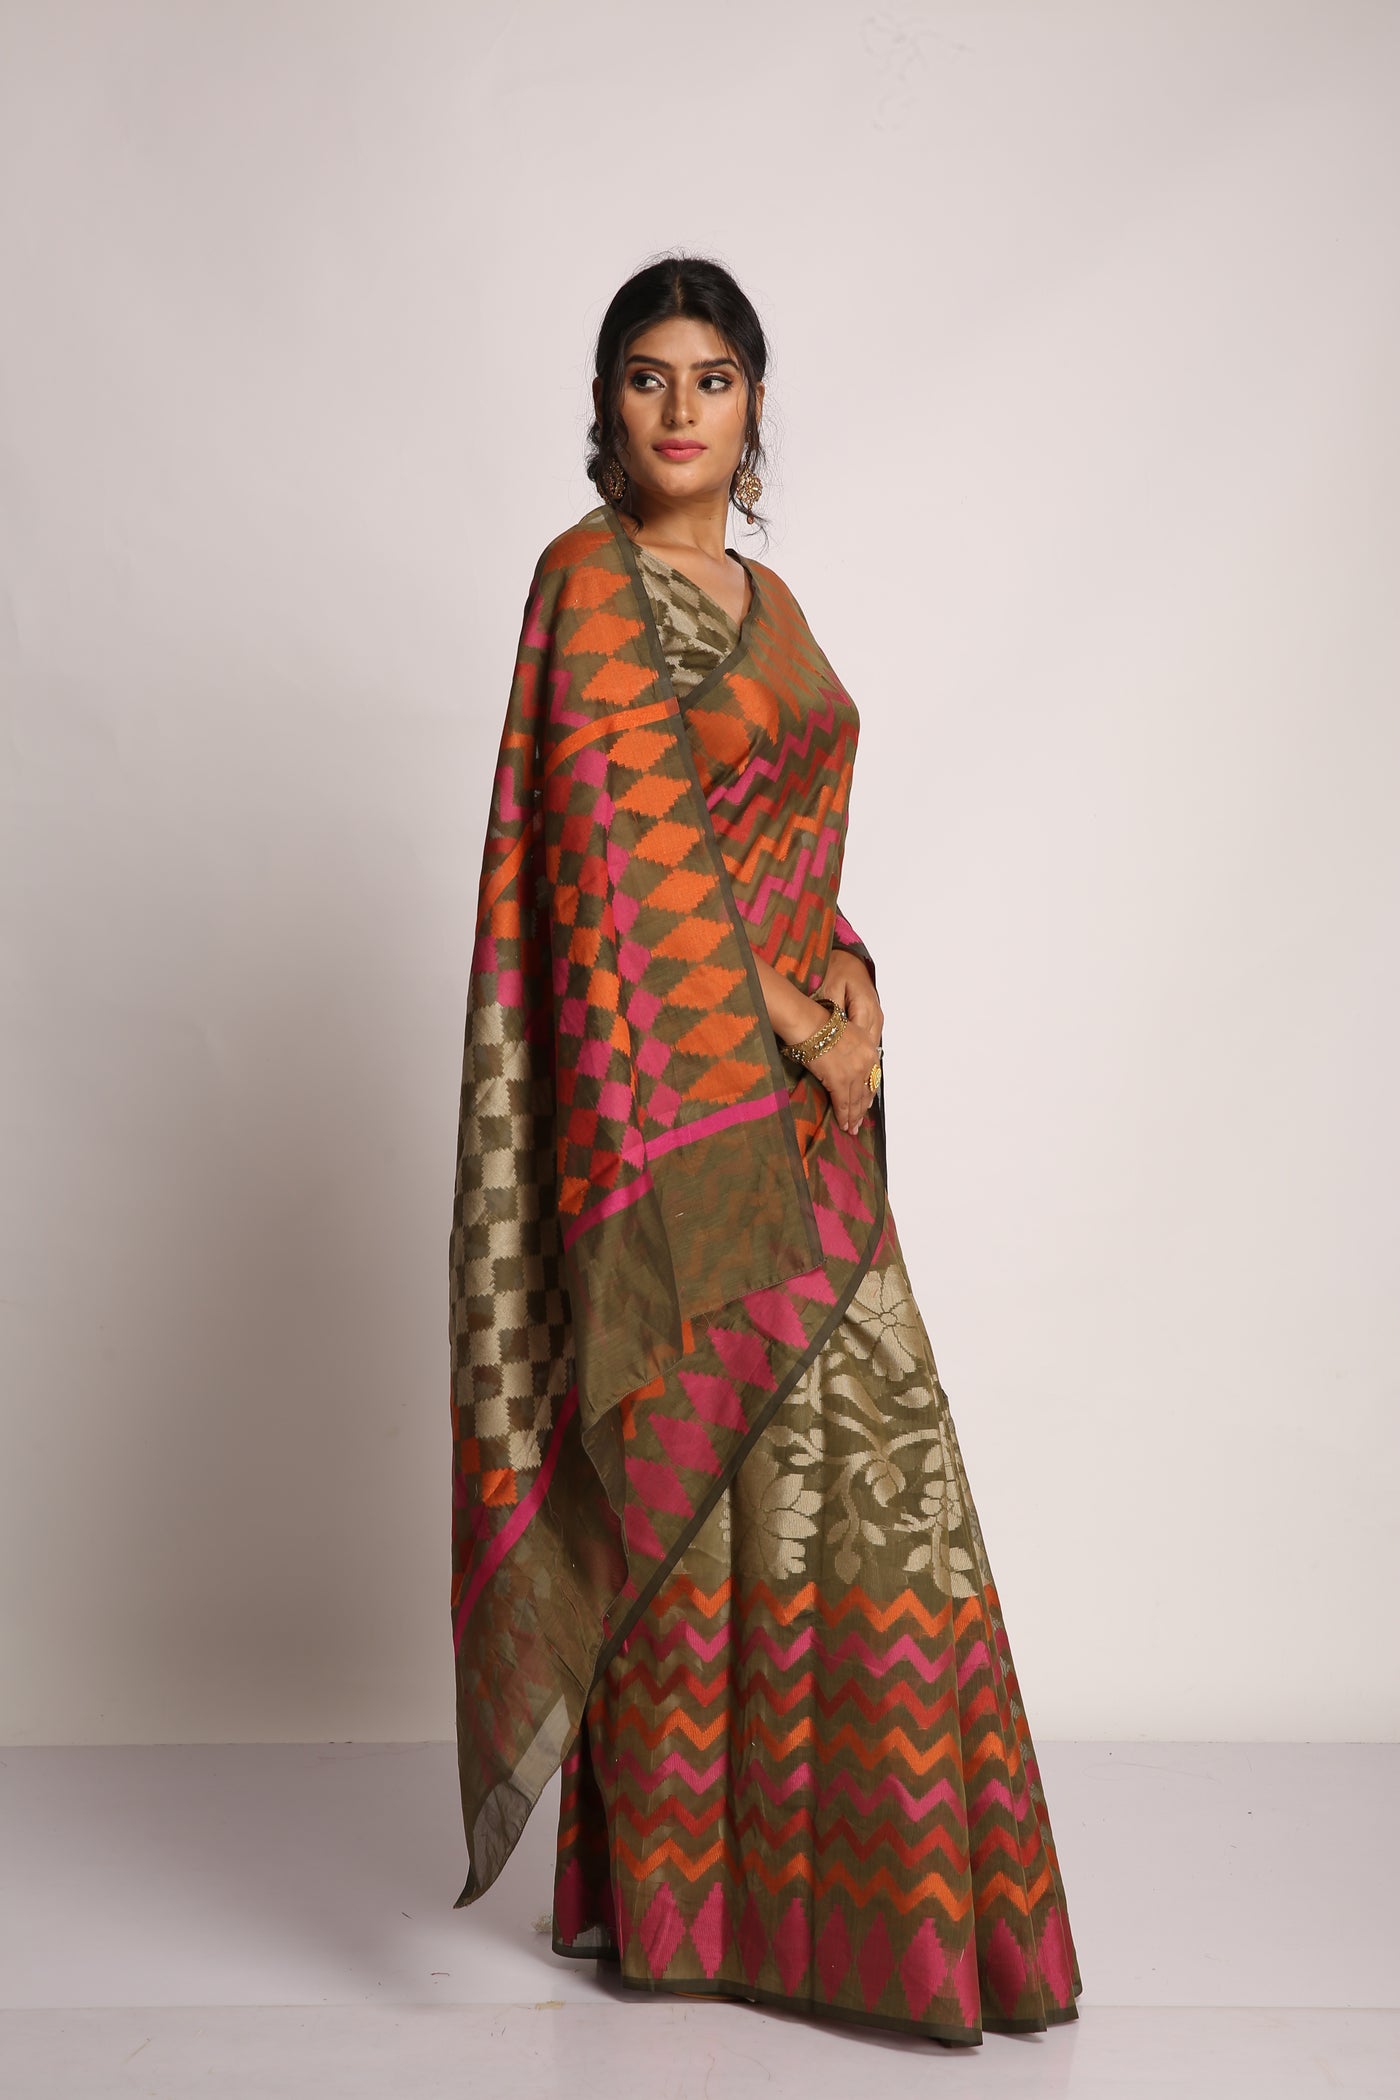 Brown Zig and Zag Saree Indian Clothing in Denver, CO, Aurora, CO, Boulder, CO, Fort Collins, CO, Colorado Springs, CO, Parker, CO, Highlands Ranch, CO, Cherry Creek, CO, Centennial, CO, and Longmont, CO. NATIONWIDE SHIPPING USA- India Fashion X